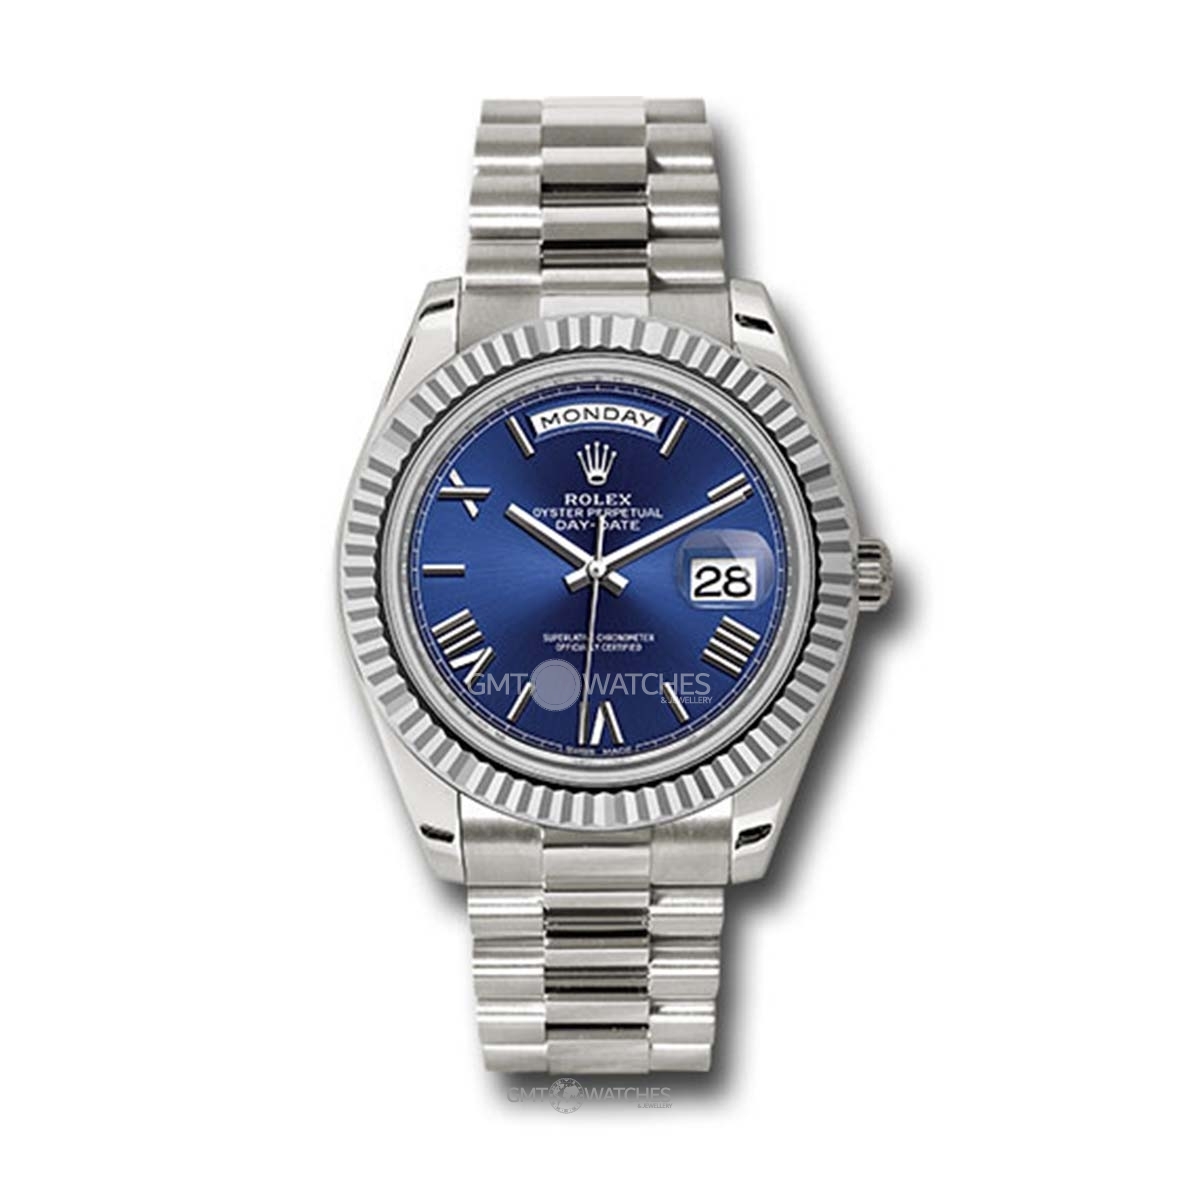 Rolex Oyster Perpetual Day-Date 40mm 18k White Gold 228239 blrp